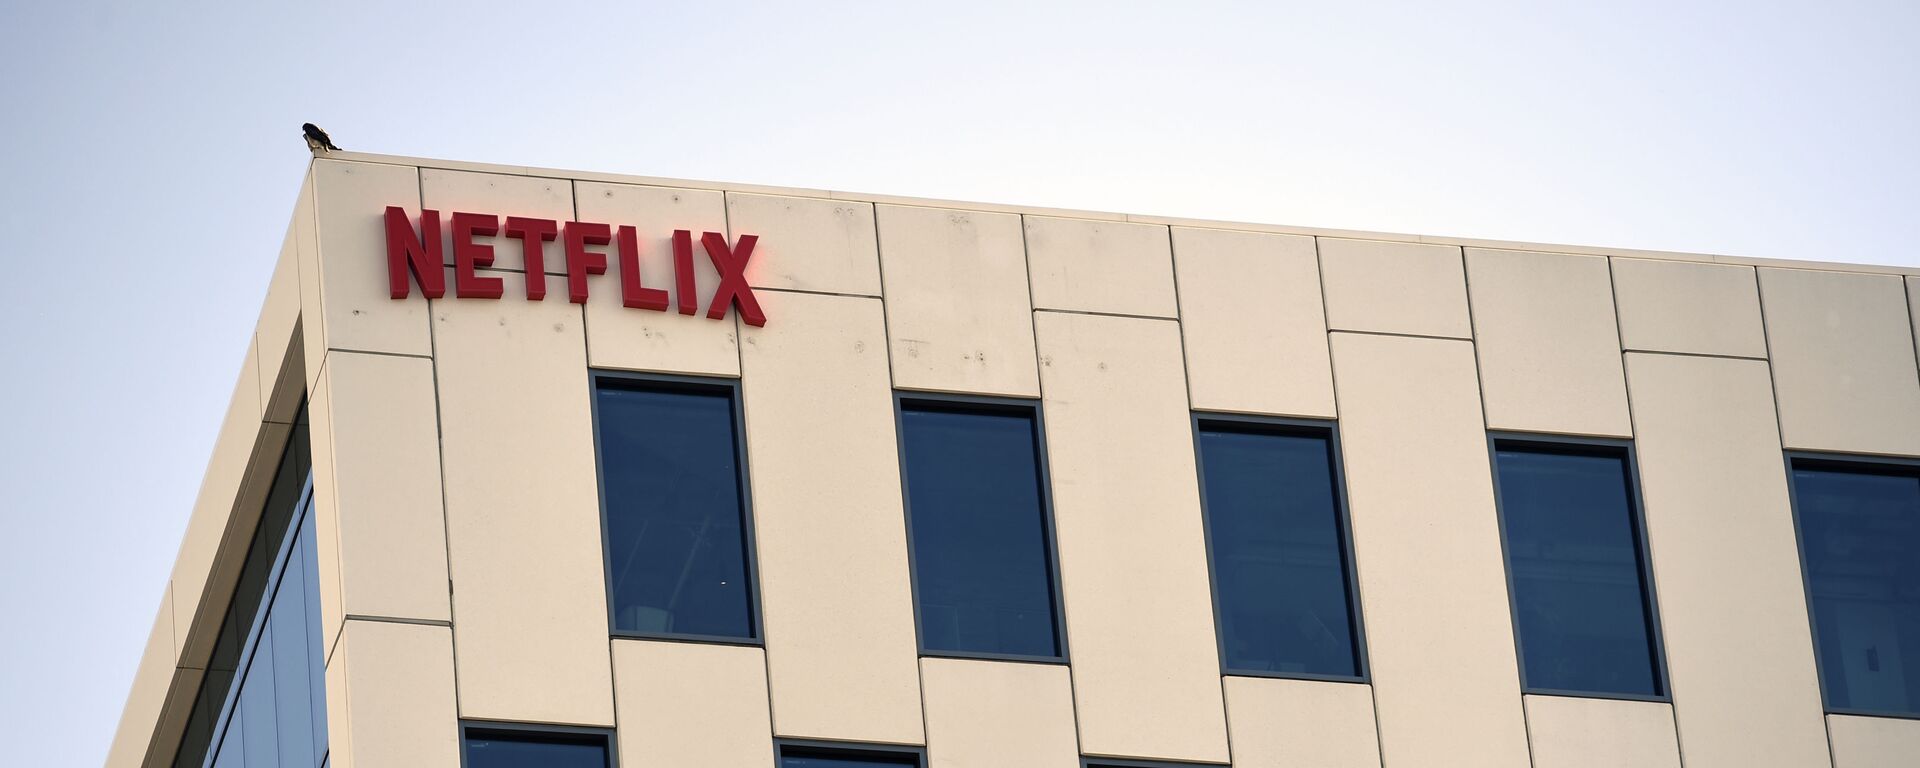 Netflix headquarters in the Hollywood section of Los Angeles is pictured, Monday, May 4, 2020 - Sputnik International, 1920, 11.11.2020